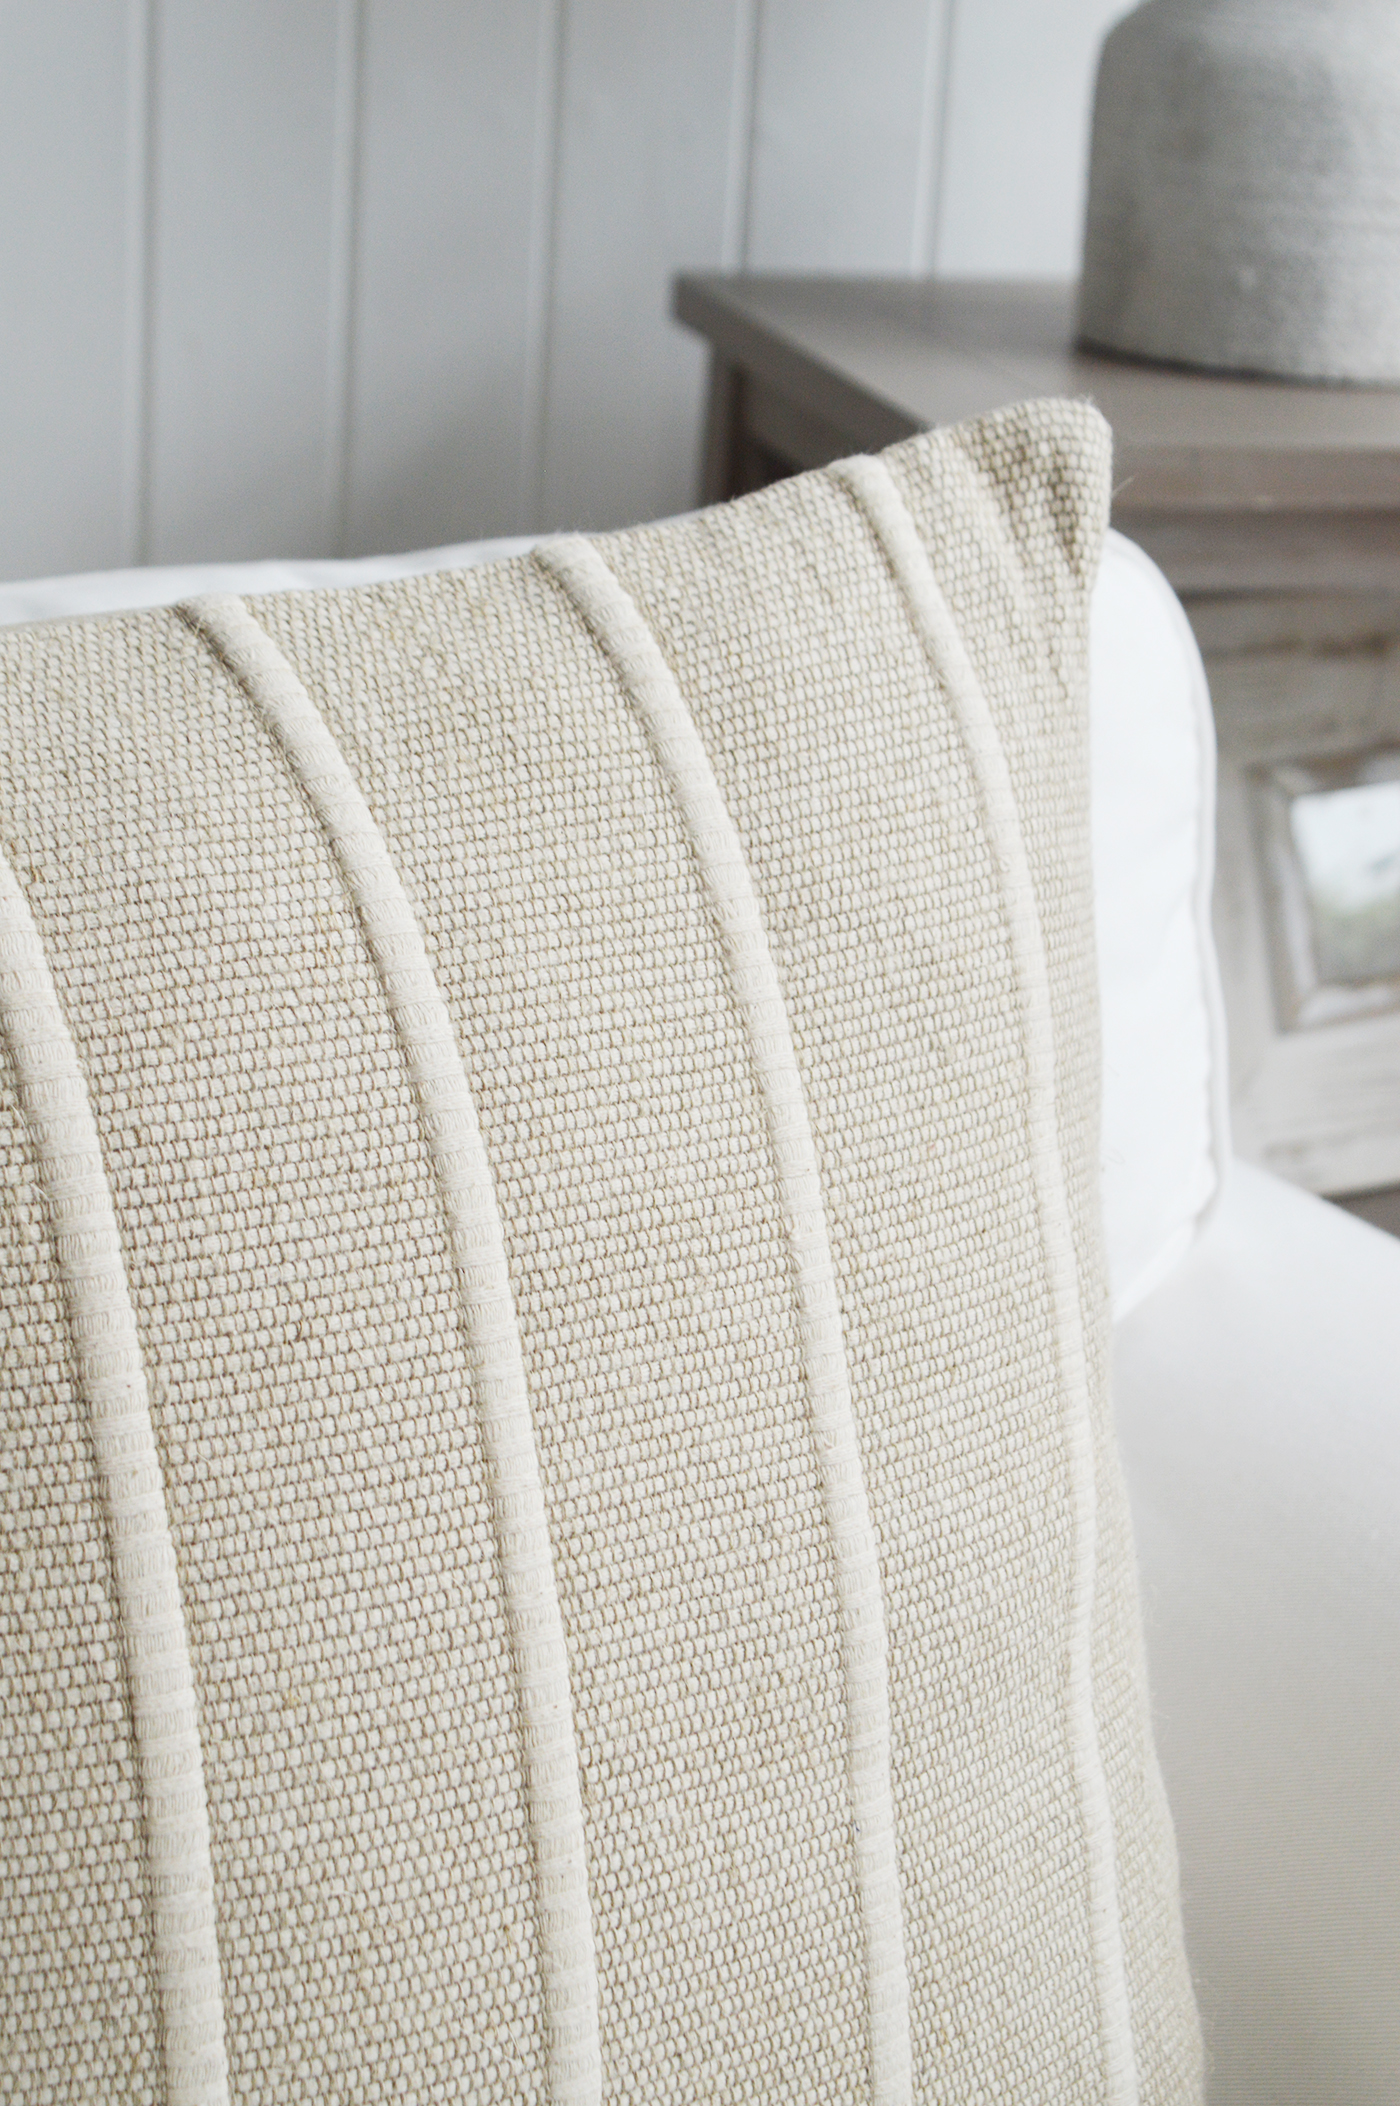 Winthrop New England style cushions - New England country and coastal cushions and interiors